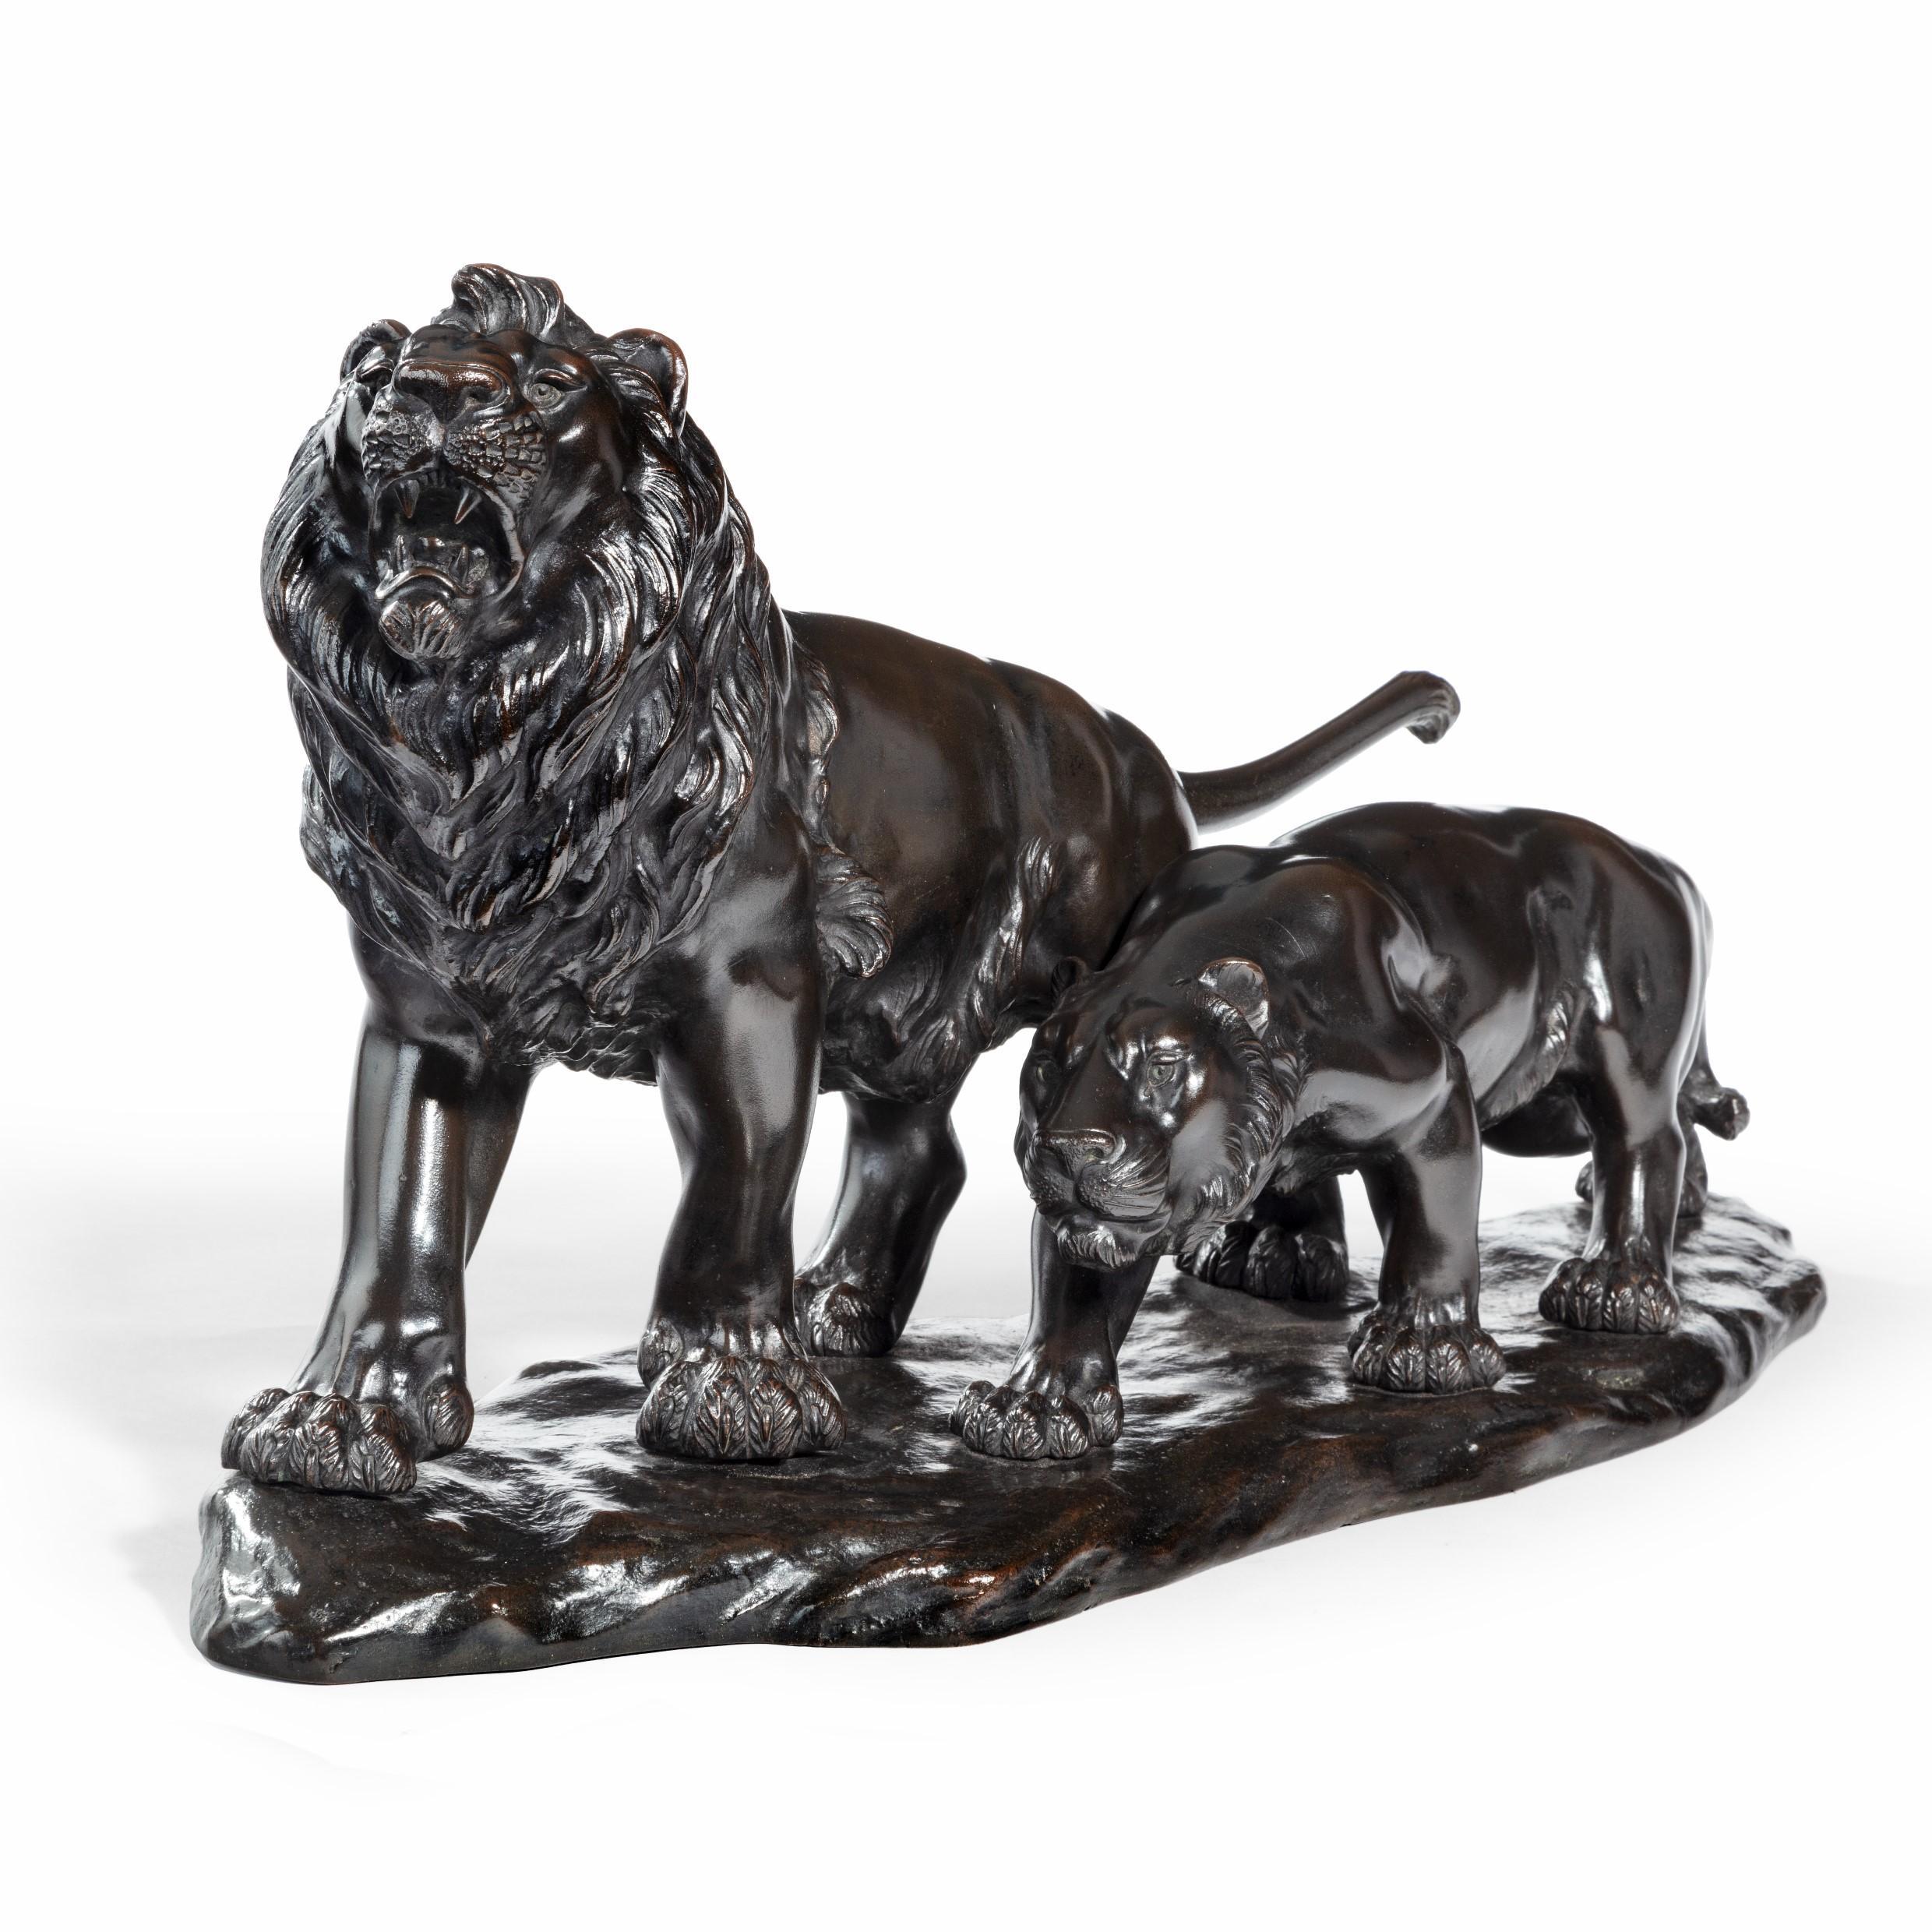 A Meiji period bronze study of a lion and lioness, the lion striding forward and snarling with the lioness slinking by his side, on a root-wood base. Signed in a seal, ‘Genryusai Seiya’. Japanese, circa 1890. Footnote: Genryusai Seiya was the master